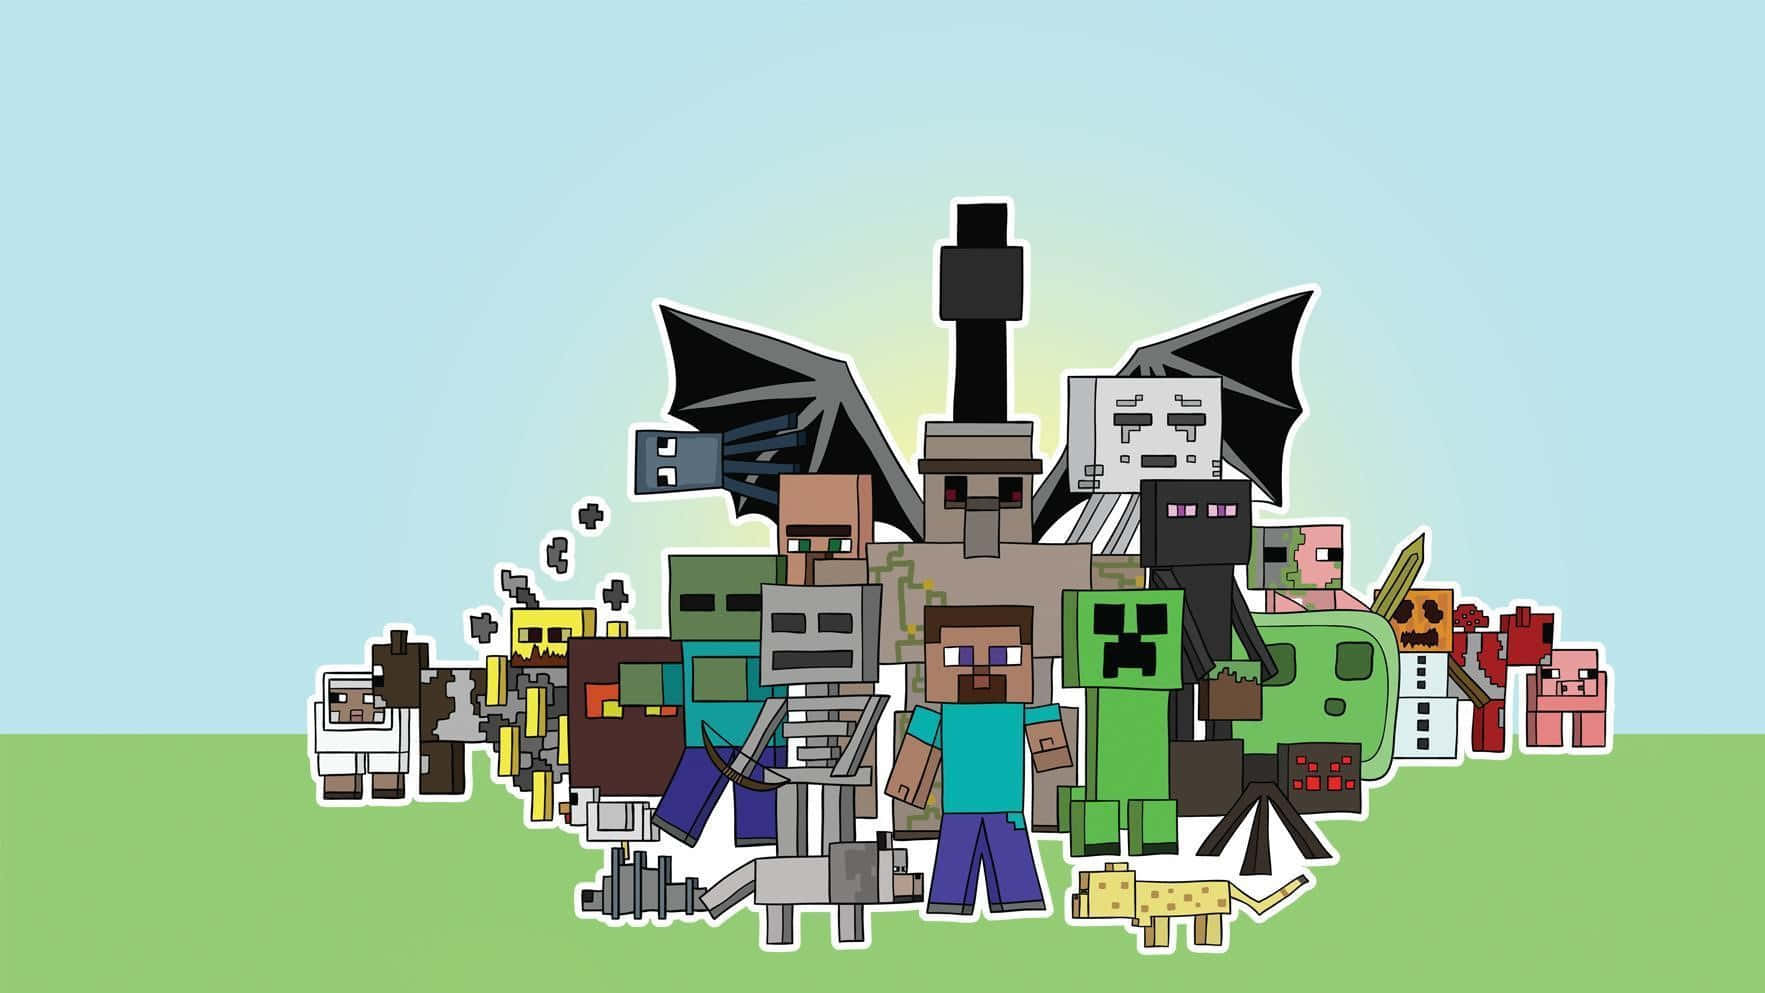 "Explore the Pixelated World of Minecraft Pig" Wallpaper